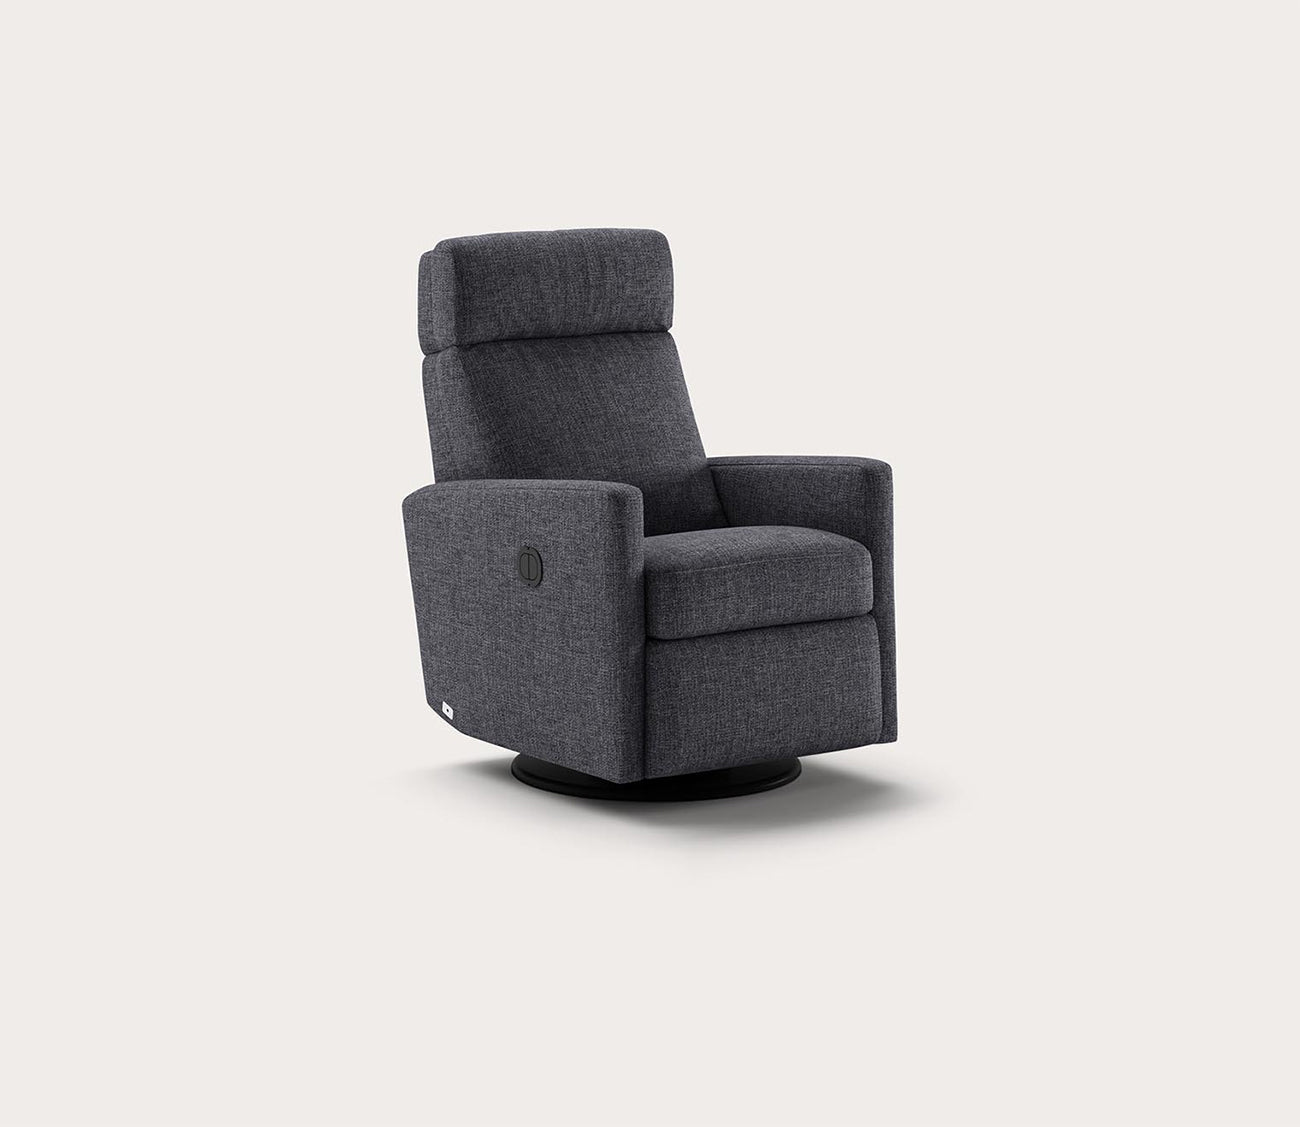 https://cdn.shopify.com/s/files/1/2420/9425/products/track-lounger-recliner-chair-by-luonto-680076.jpg?v=1698219525